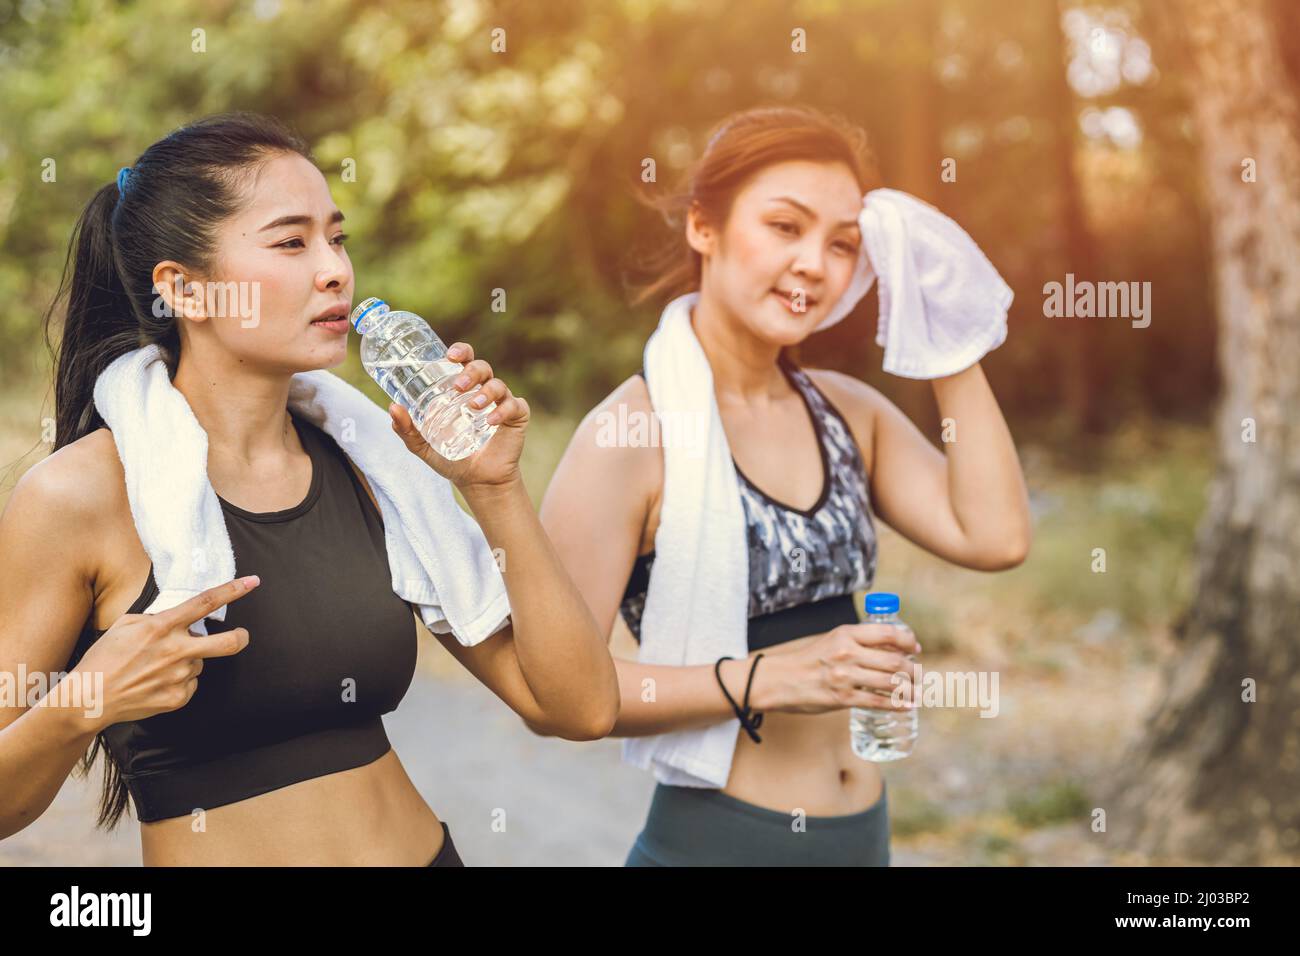 healthy sport women thirsty drinking water during exercise in hot summer season Stock Photo